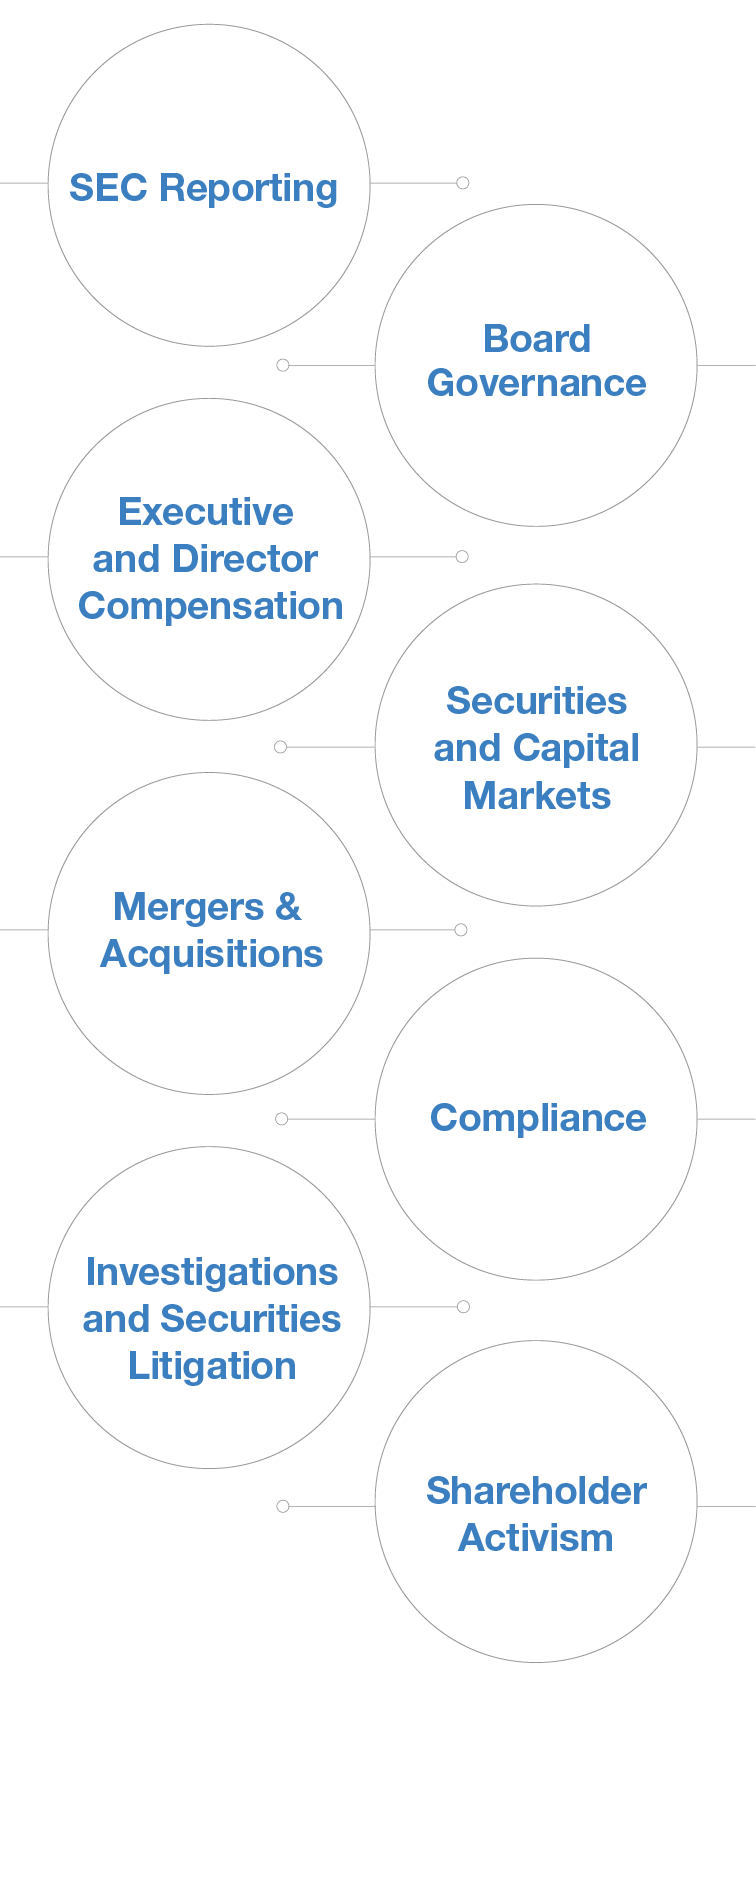 SEC Reporting, Board Governance, Executive and Director Compensation, Securities and Capital Markets, Mergers & Acquisitions, Board Governance, Investigations and Securities Litigation, Compliance, Shareholder Activism